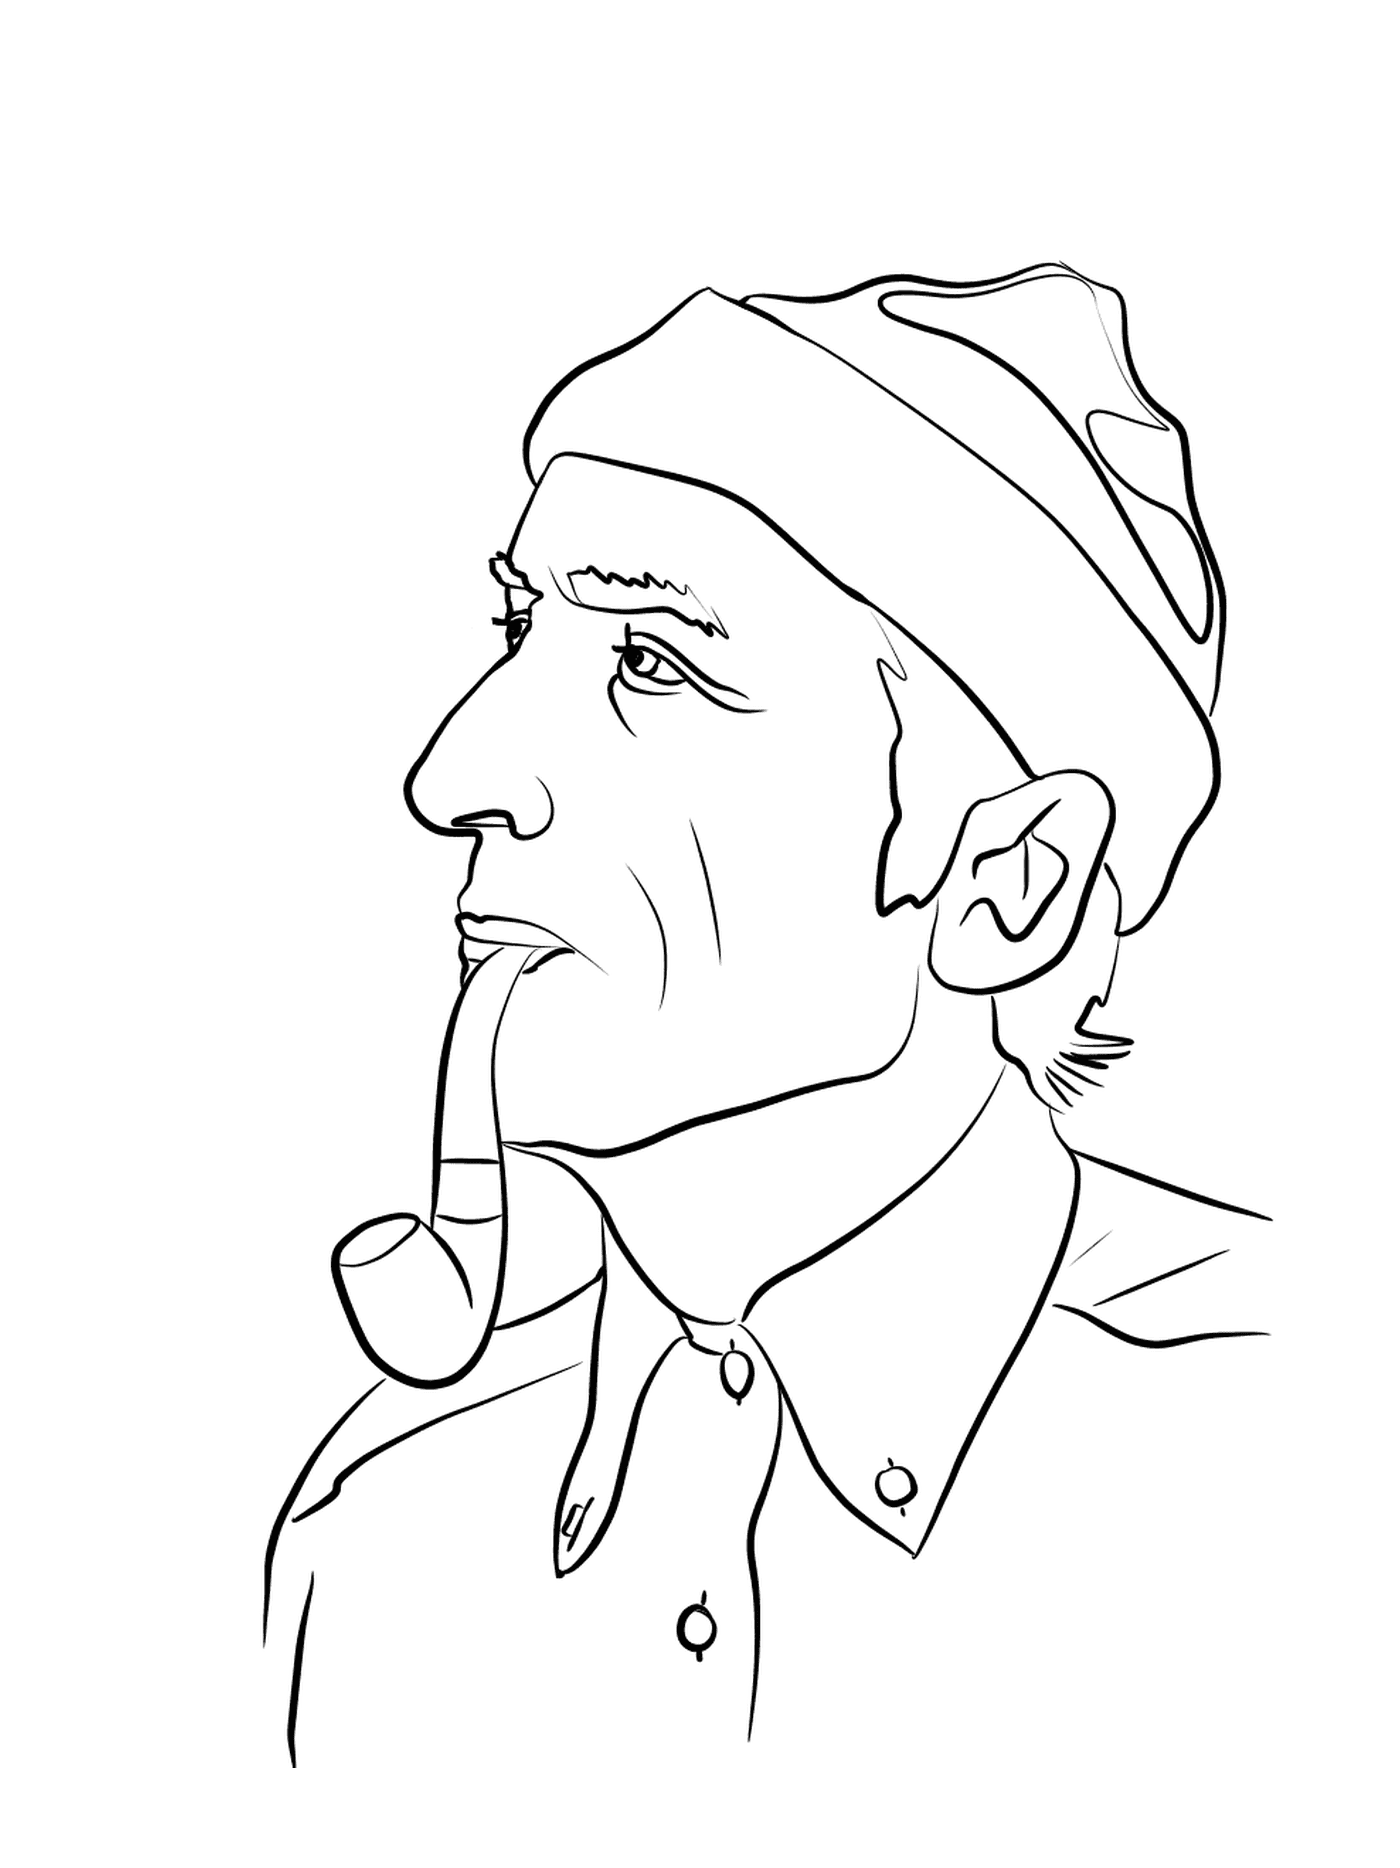  Jacques-Yves Cousteau, renowned explorer 